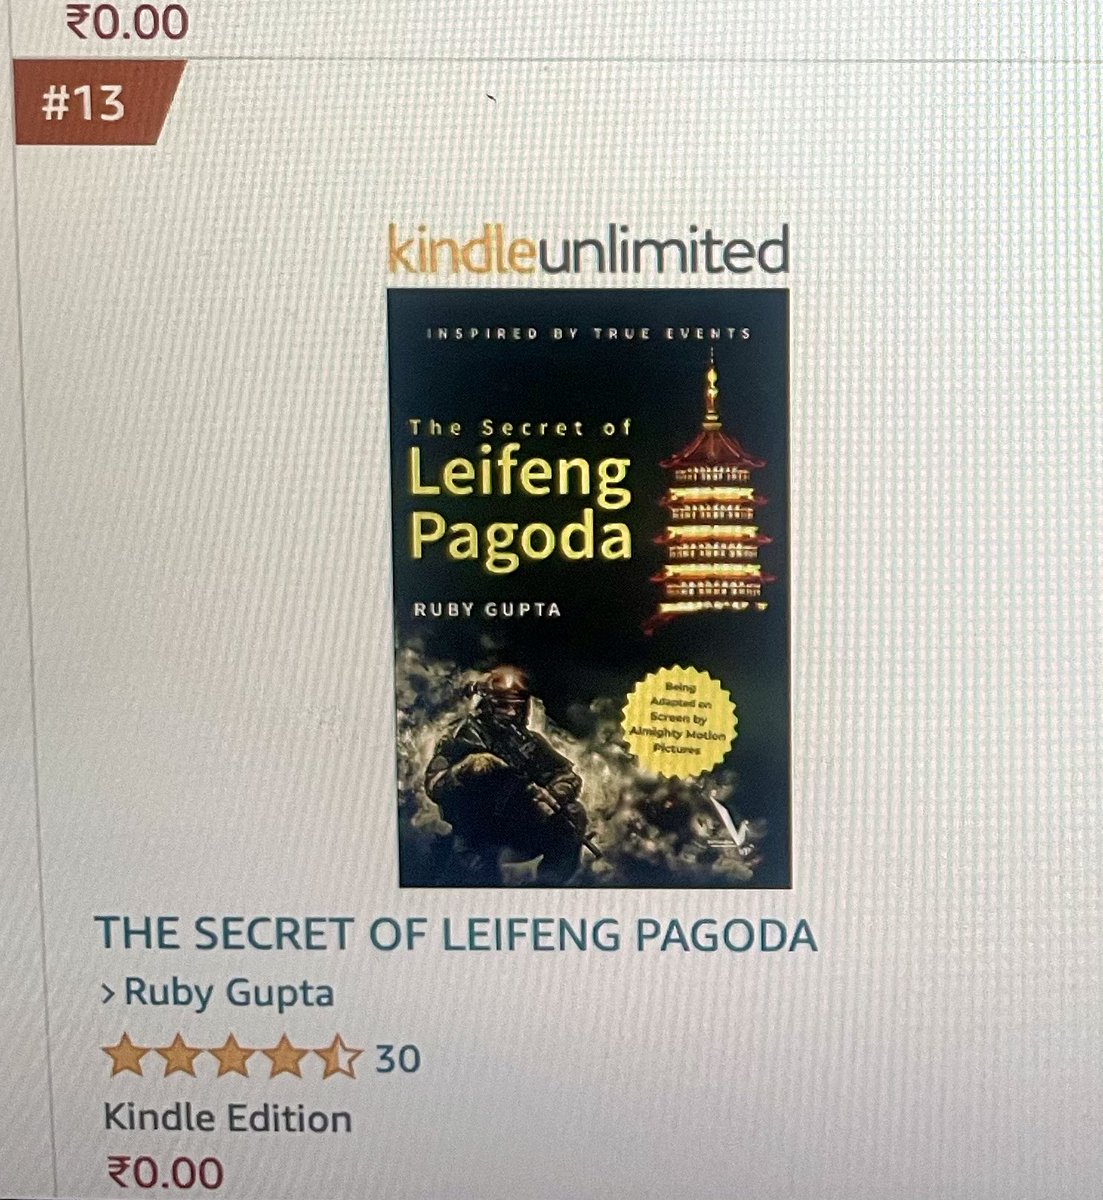 Even today #TheSecretOfLeifengPagoda is at #3 and at #13 on #AmazonBestSellers in Action & Adventure and Historical Fiction respectively!